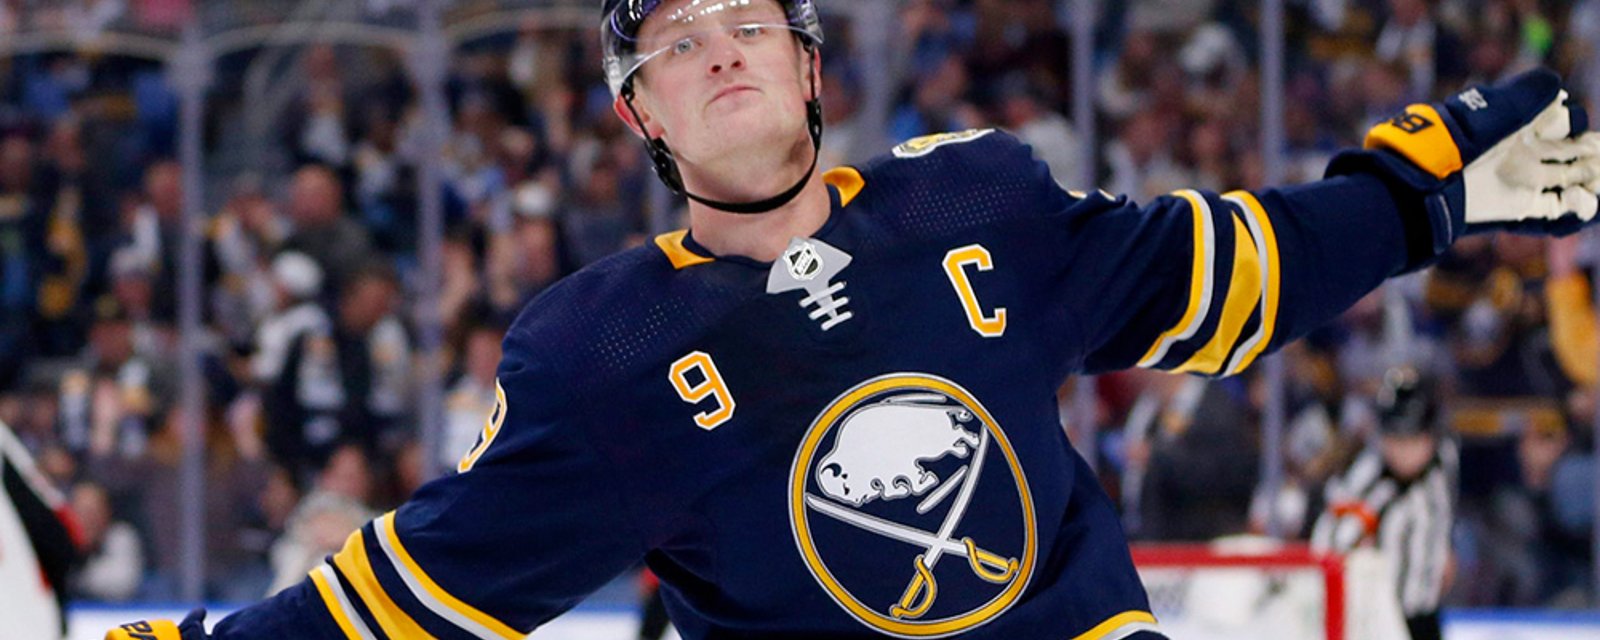 Jack Eichel fires his agent in an effort to force trade from Sabres